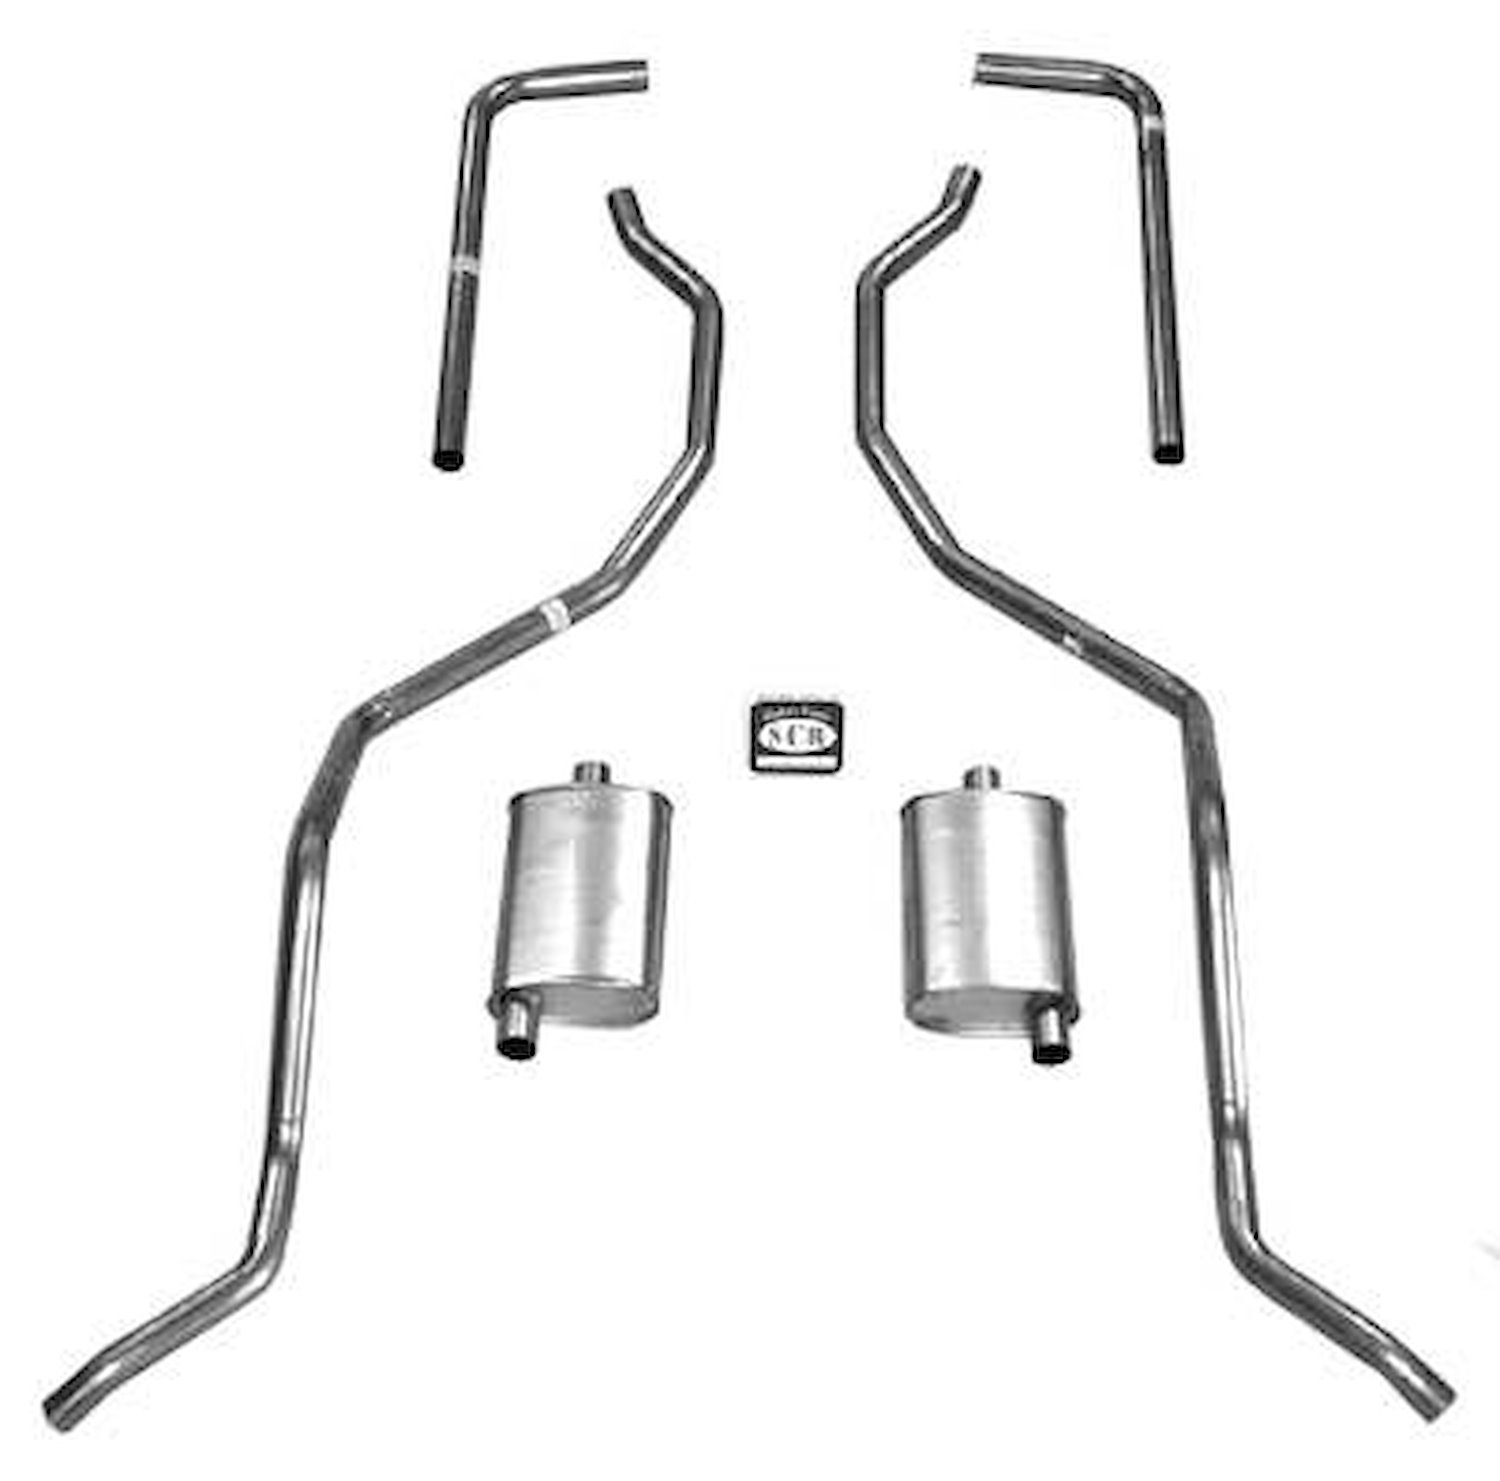 73043S 1960-1964 Chevrolet Full-Size Exhaust System, 304 Stainless Steel